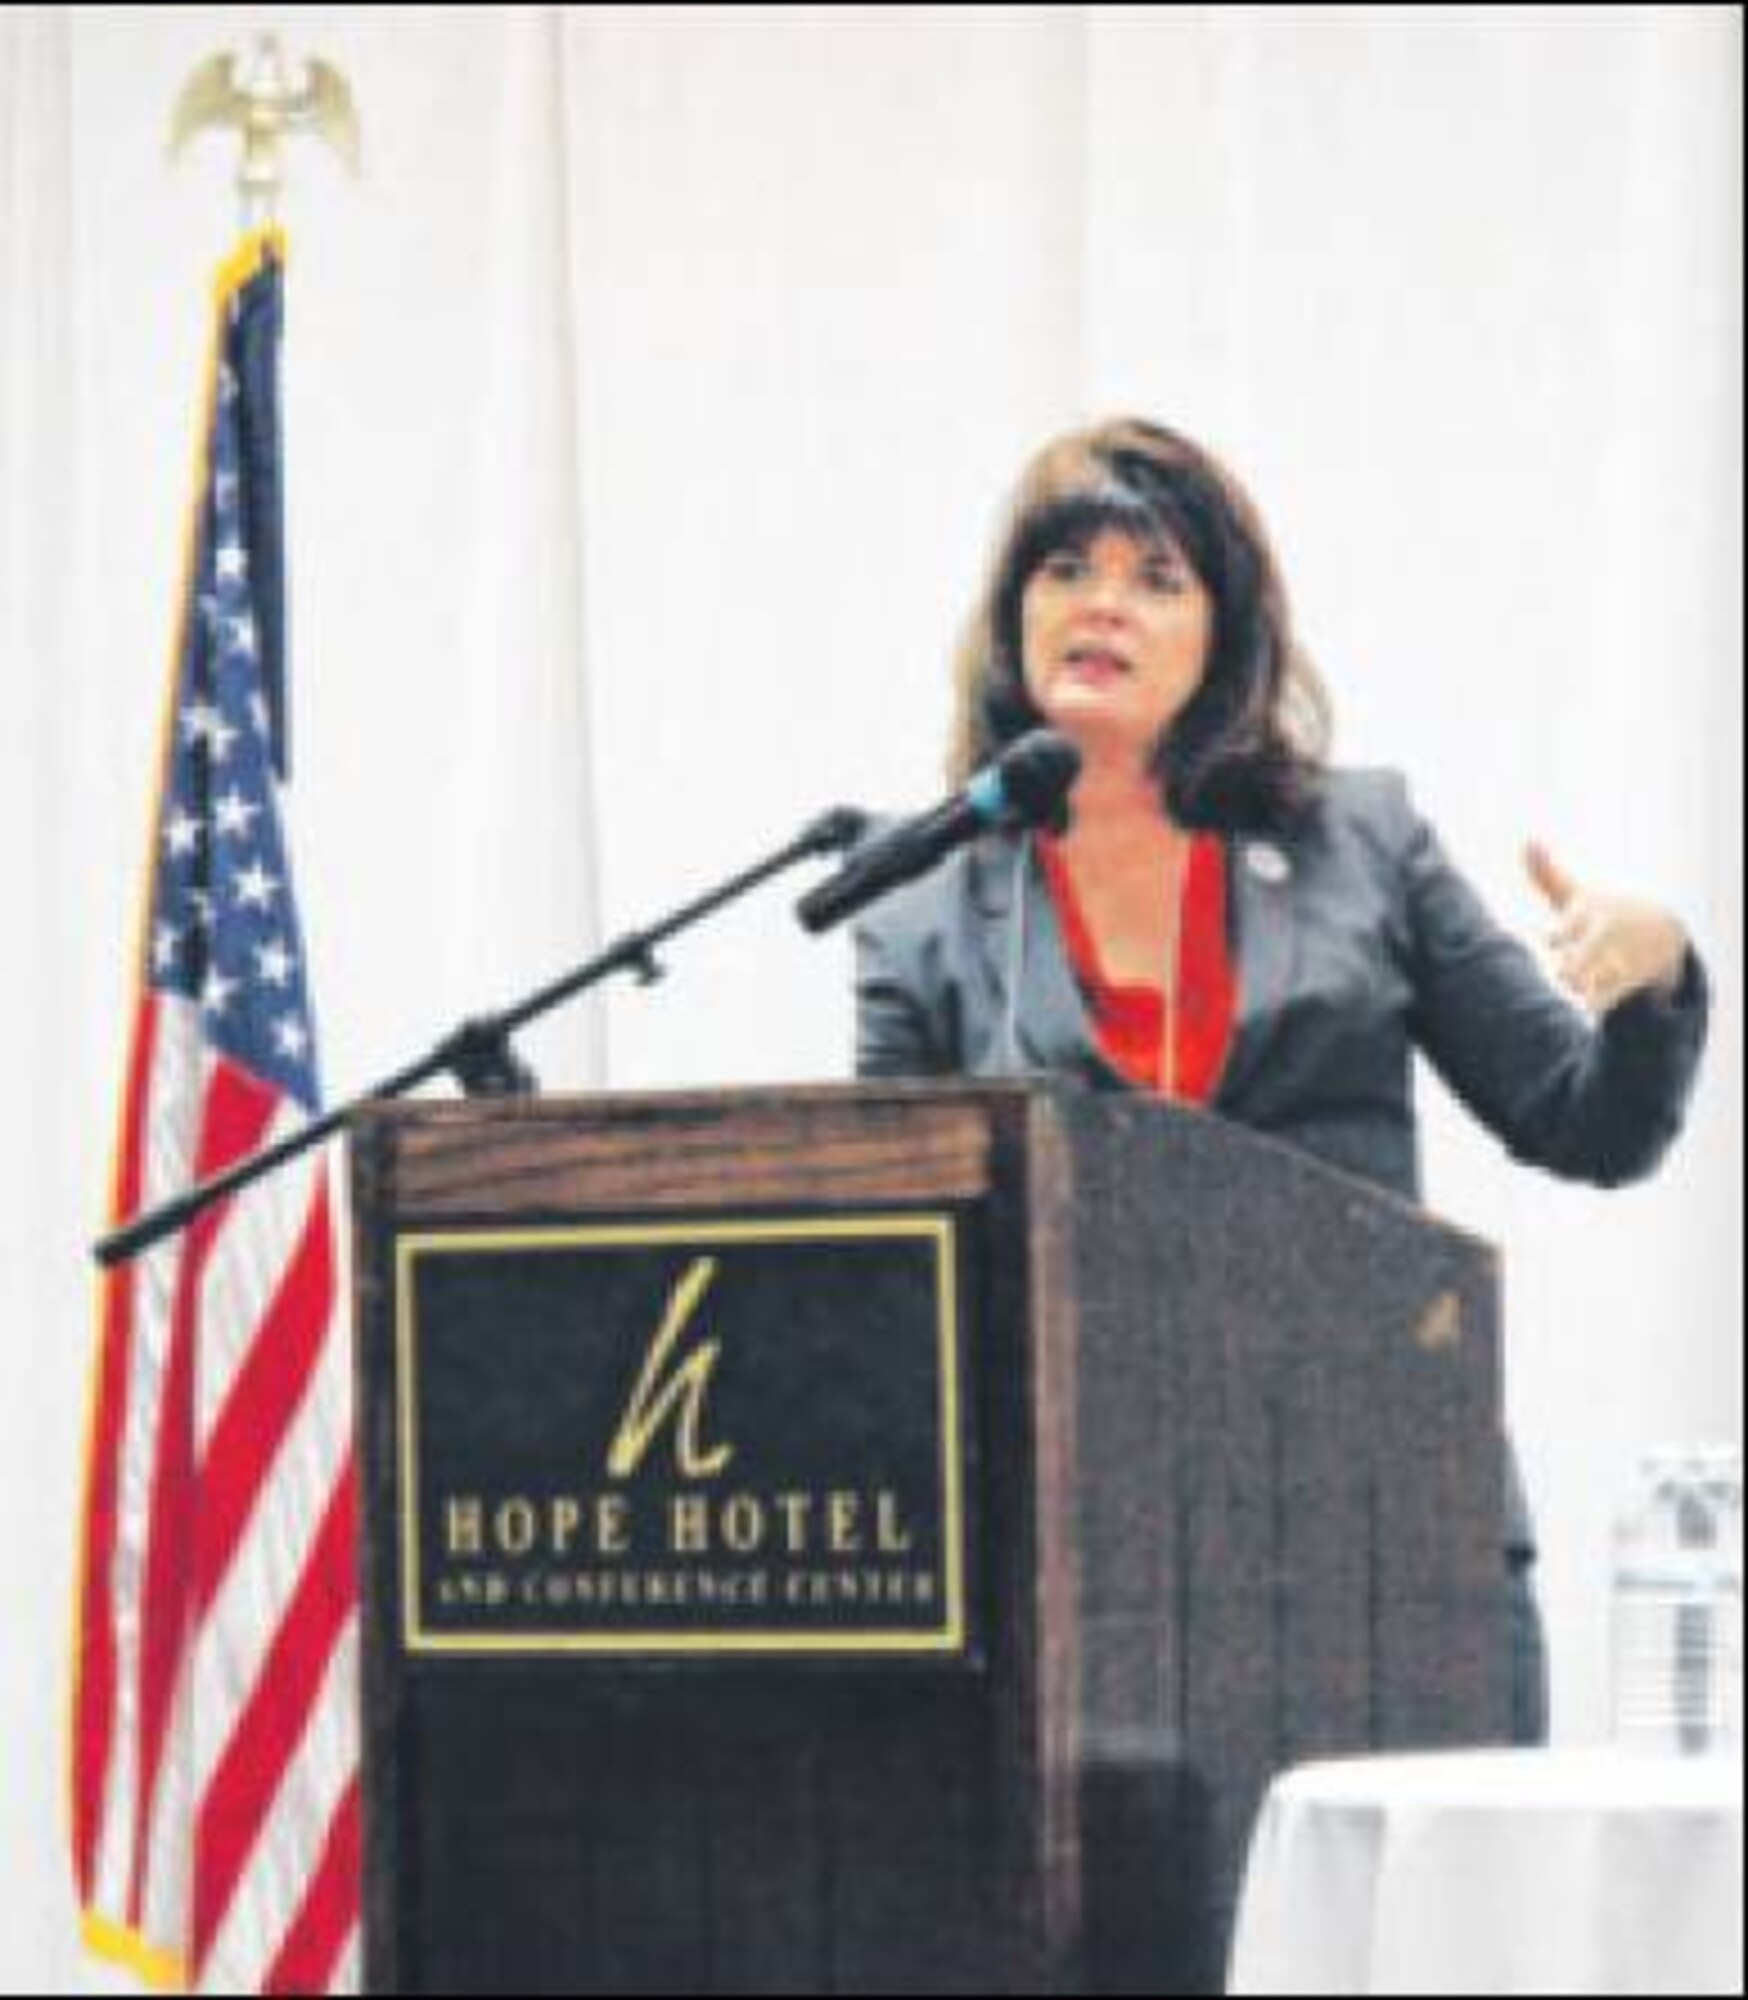 Dr. Mica Endsley, chief scientist of the U.S. Air Force, served as the keynote speaker at the Southern Ohio Chapter of the Human Factors and Ergonomics Society 50th anniversary event Oct. 21 at the Hope Hotel. (Air Force photo by Christopher Gulliford)